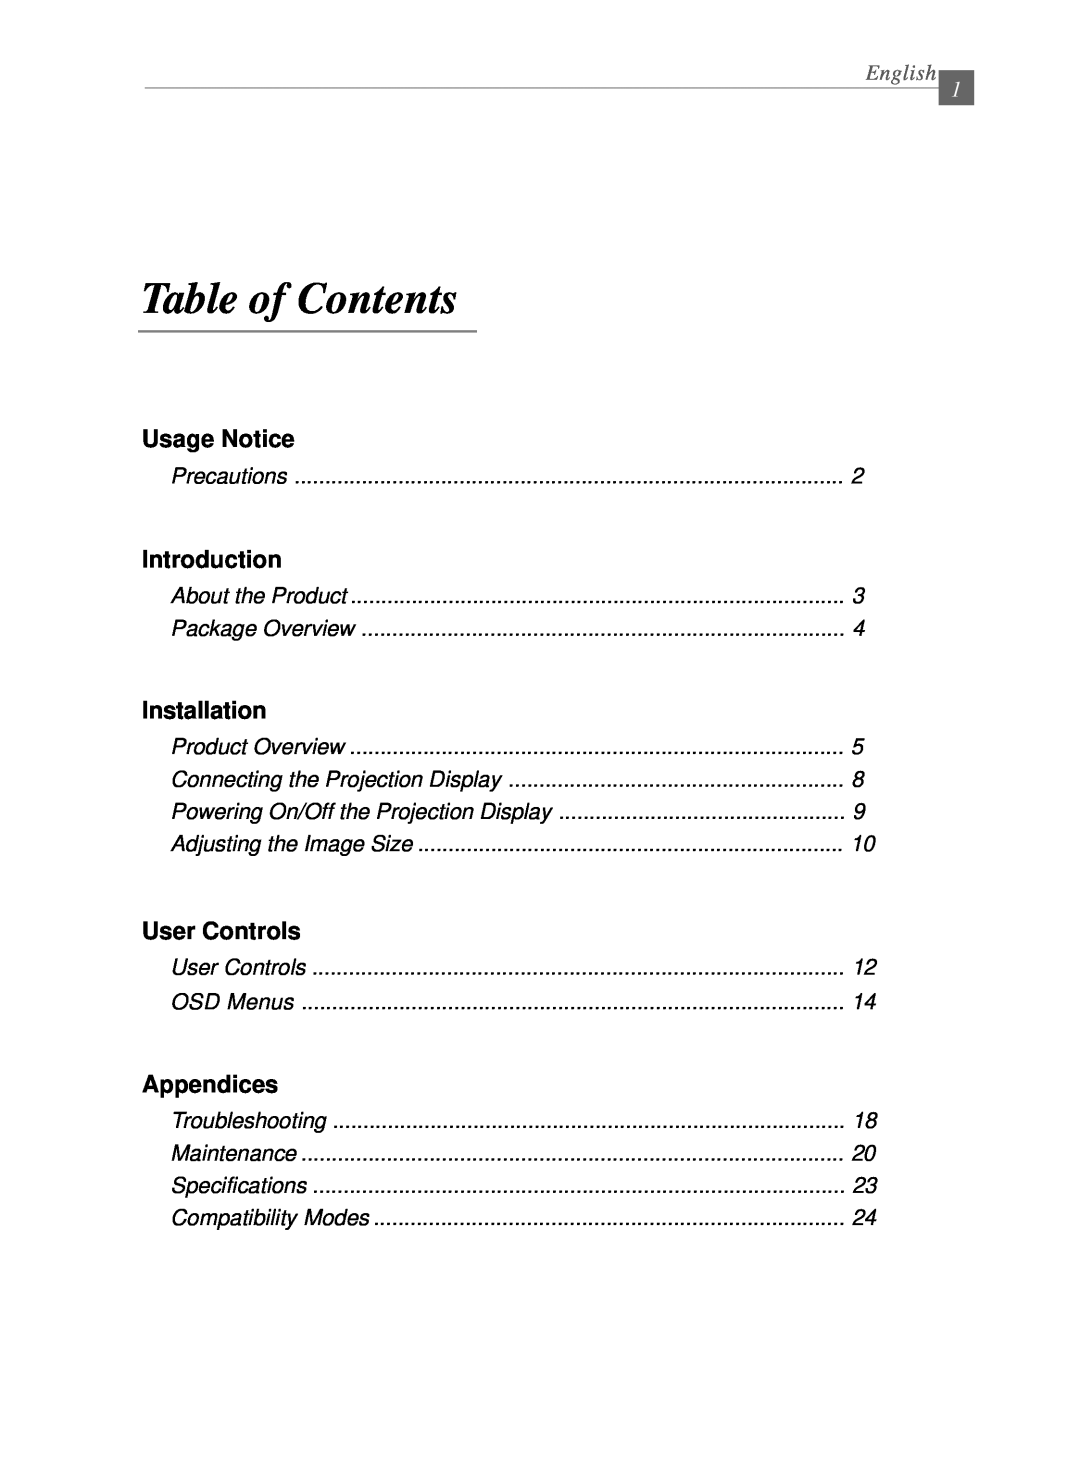 Dukane 28A8040 manual Table of Contents, Usage Notice, Introduction, Installation, User Controls, Appendices, English 